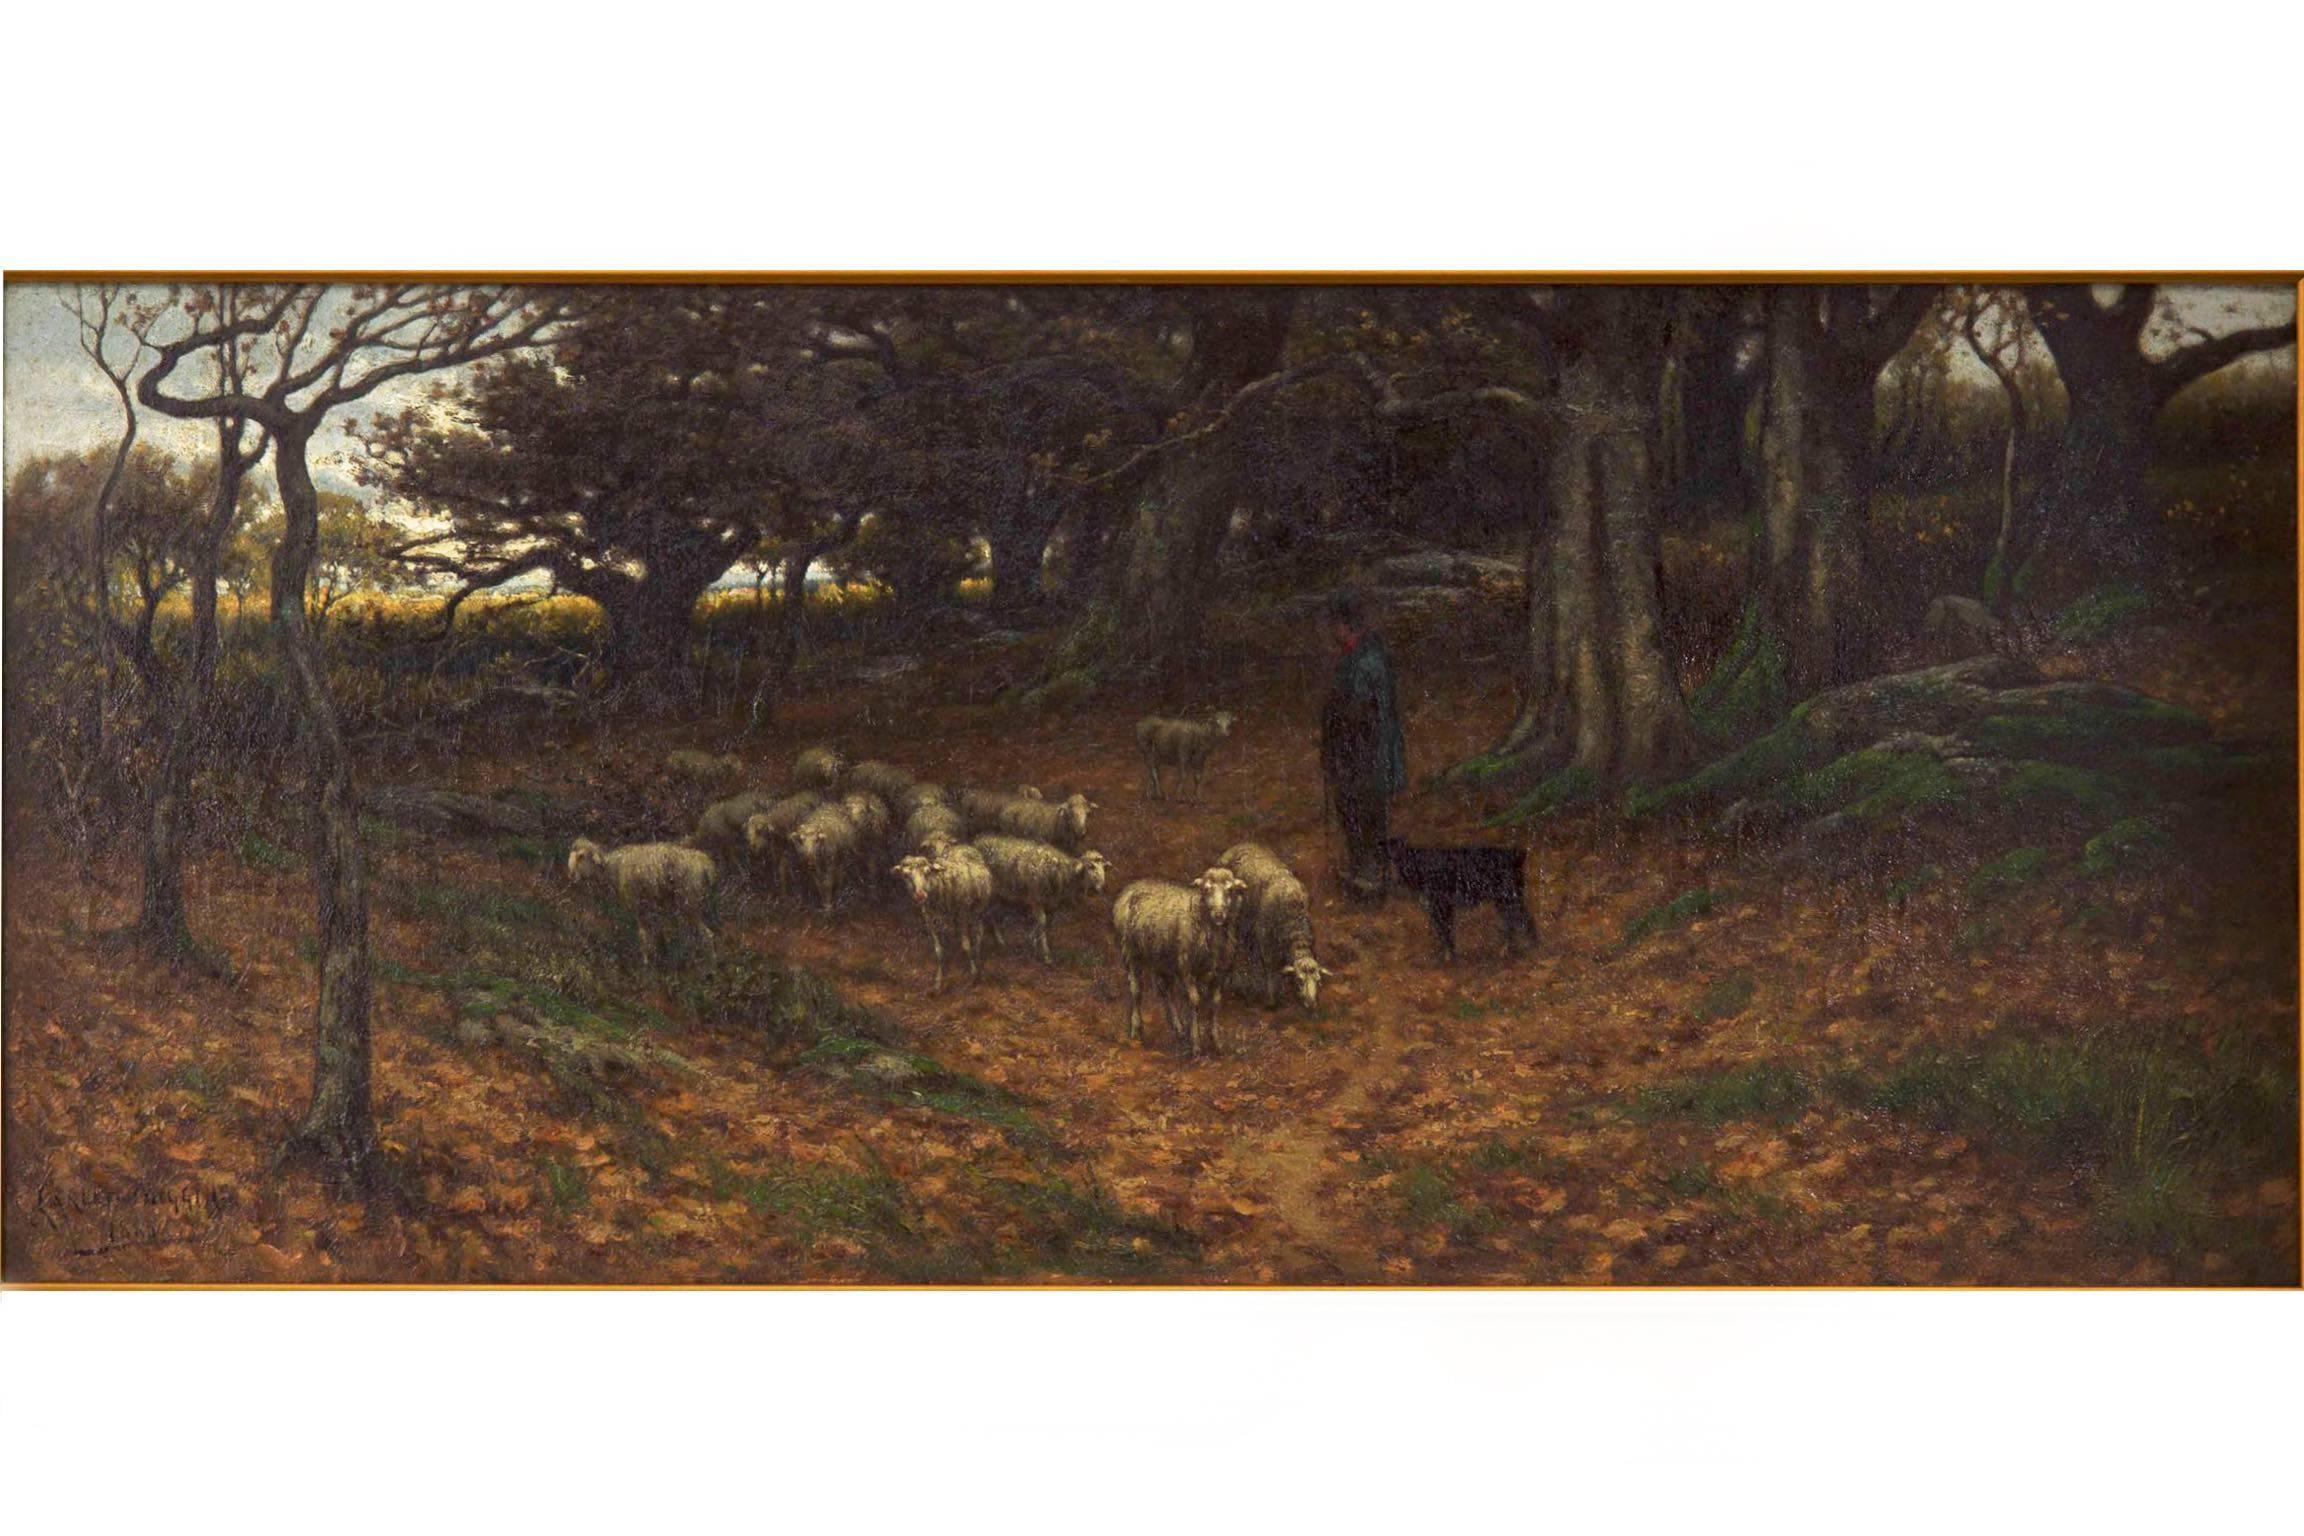 A complex and vivid panorama set in a Normandy forest, this fine painting depicts a Shepherd with his dog watching over a large flock of sheep as they stroll along a leafy path.  Only brief patches of grass poke through the carpeted path while the